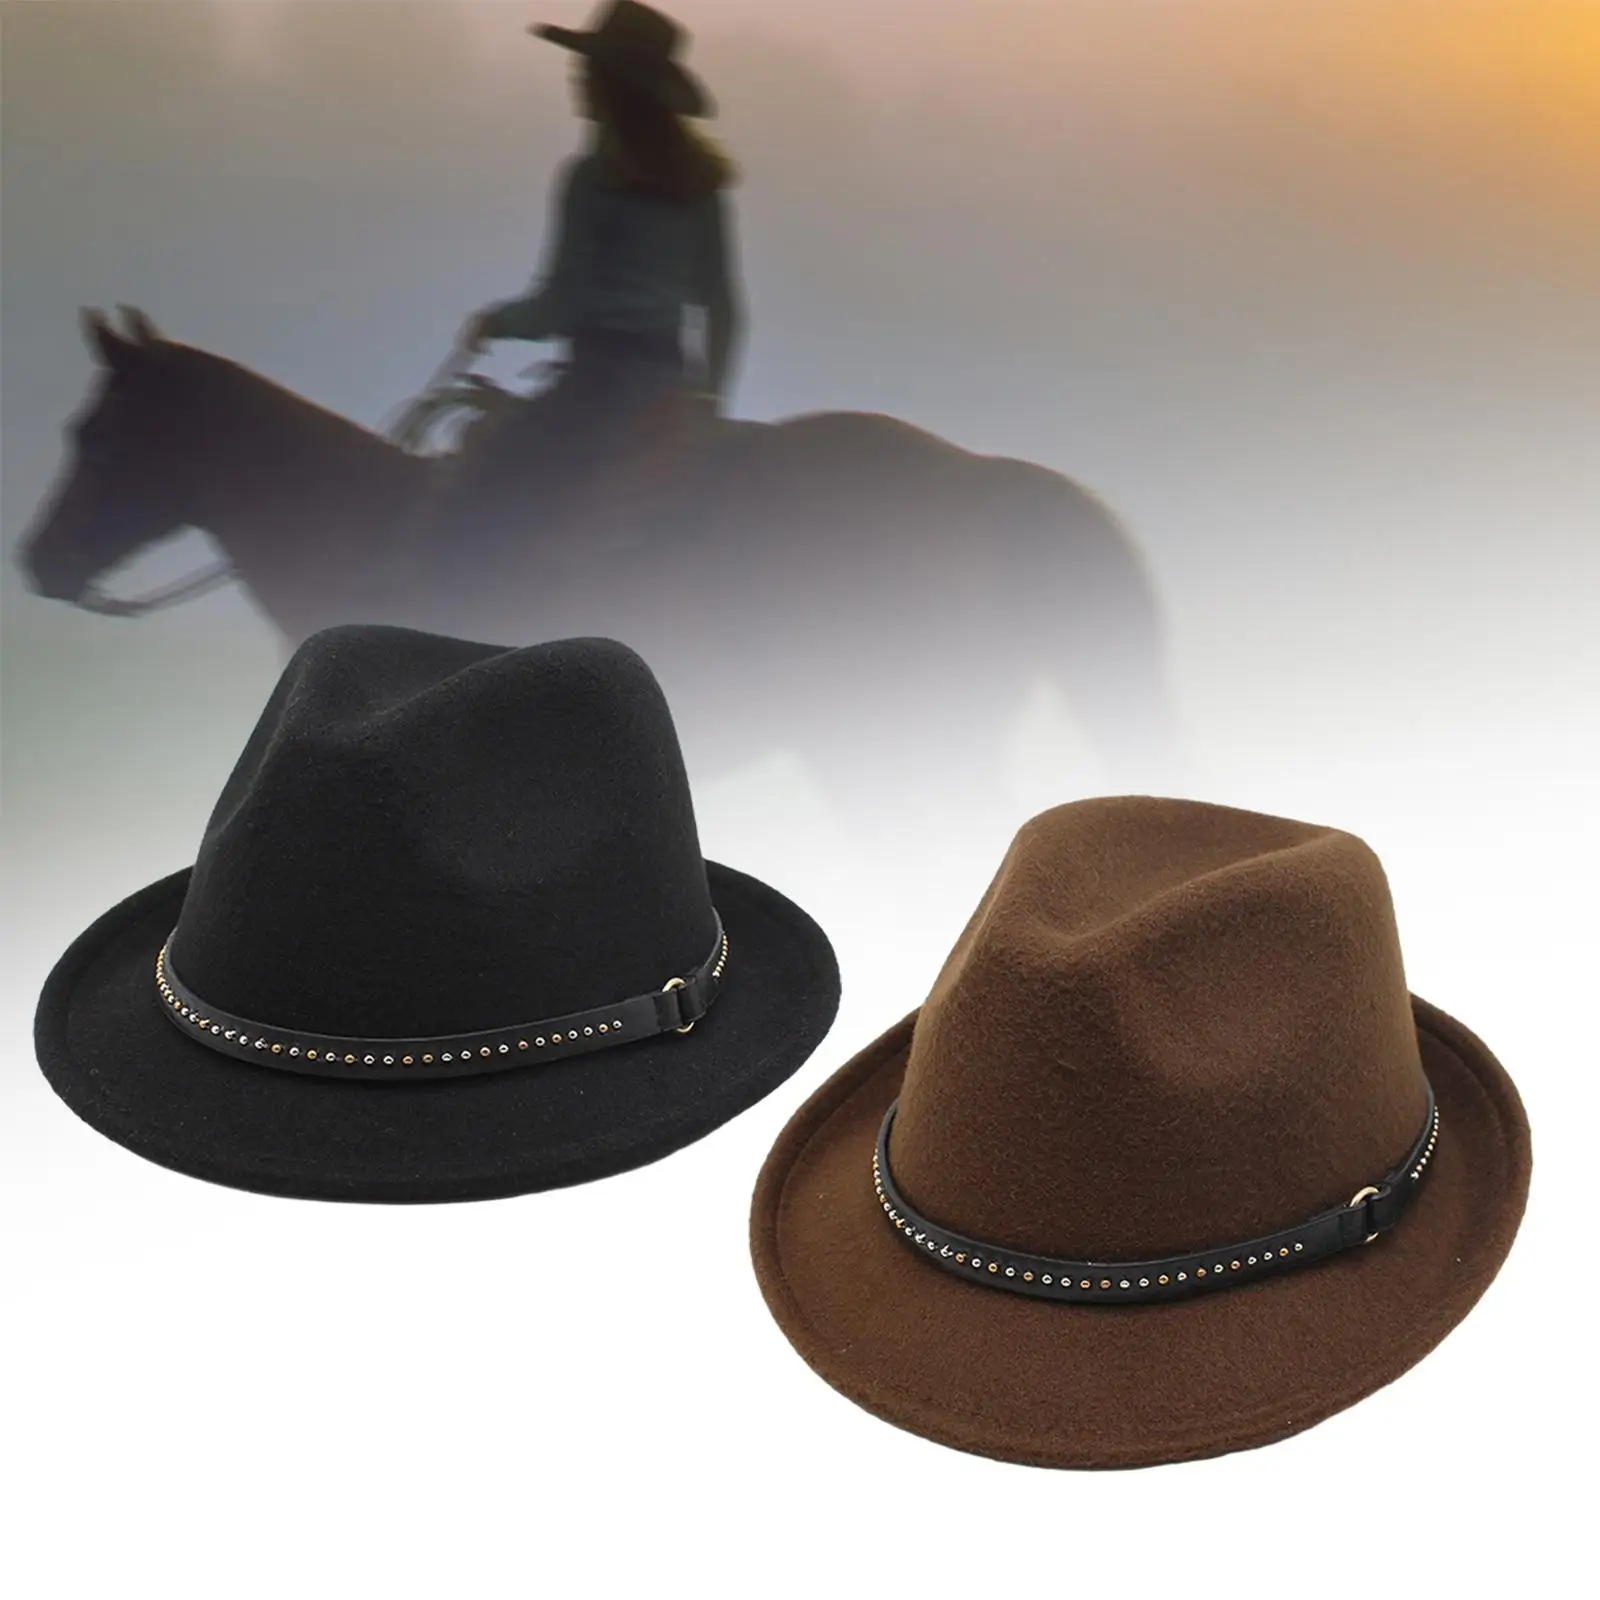 Fedora Hats Costume Accessory Decorated Fashion Western Cowboy Hat Casual Sun Hat Jazz Cap Short Brim for Travel Dress up Events